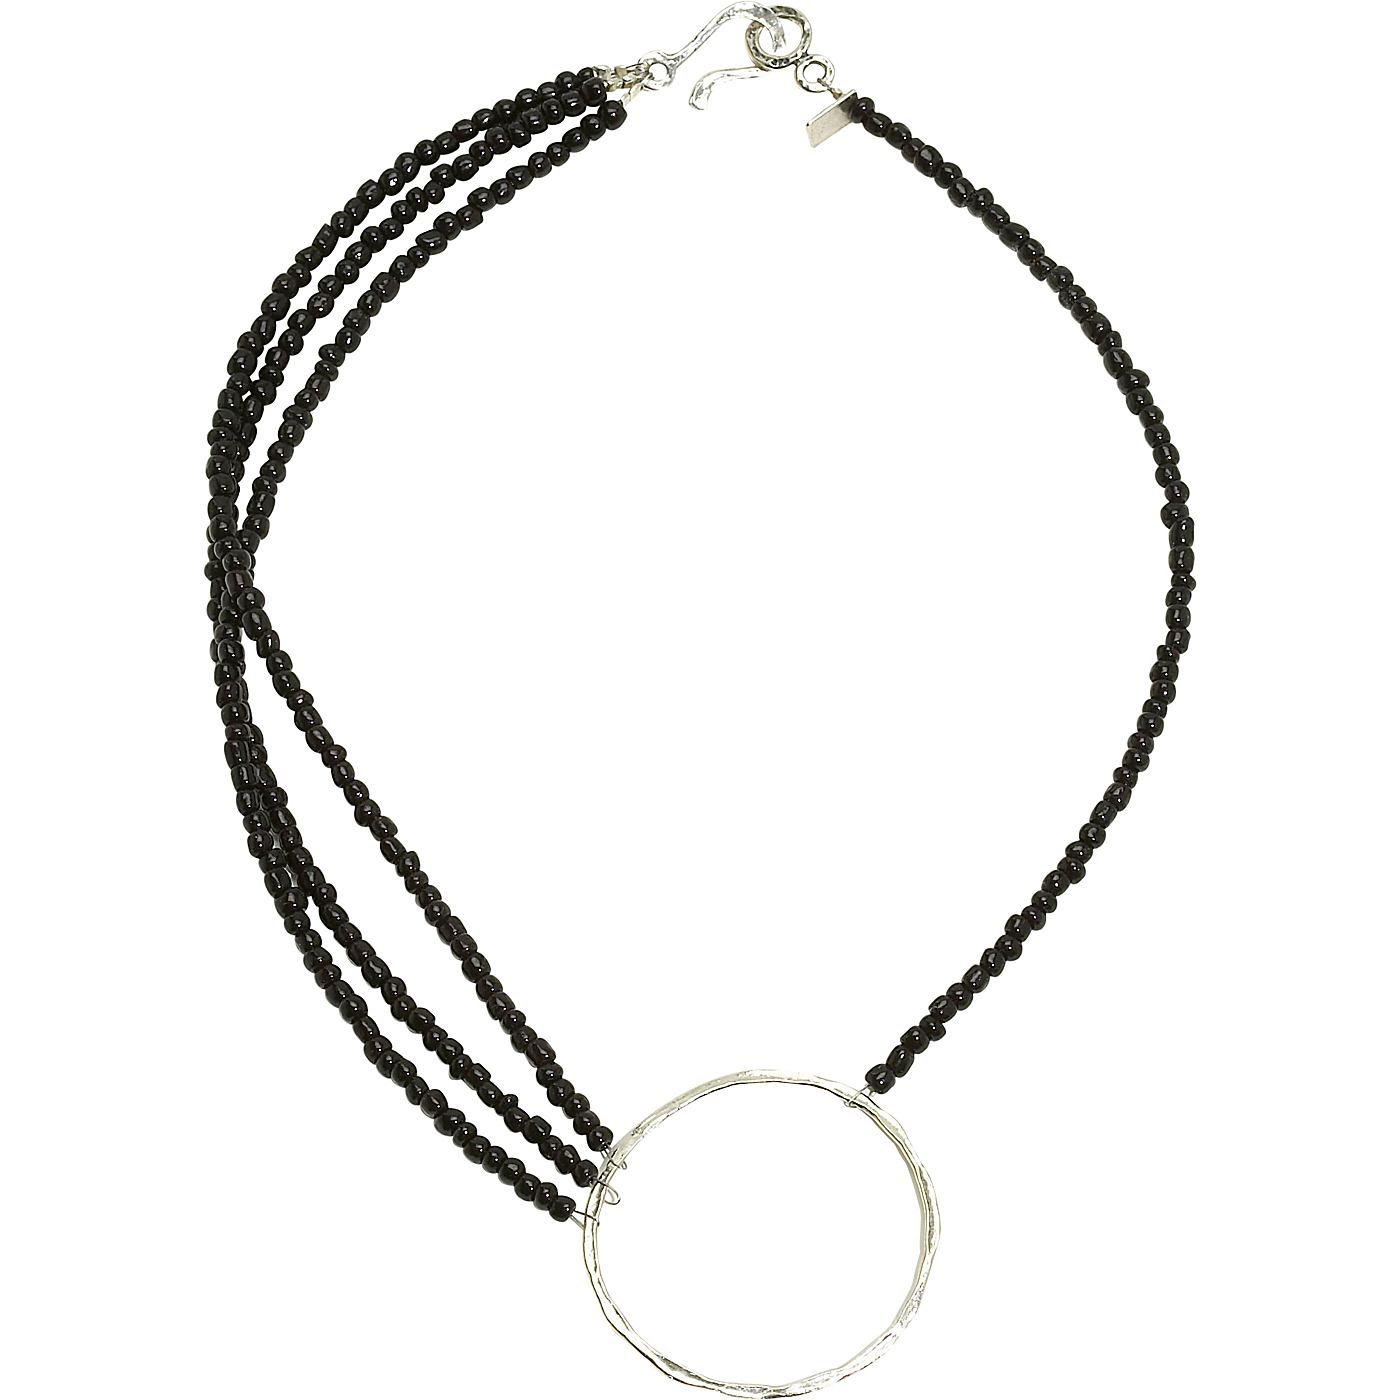 Heather Pullis Designs Short Black Seed Bead Necklace After 20% off $ 